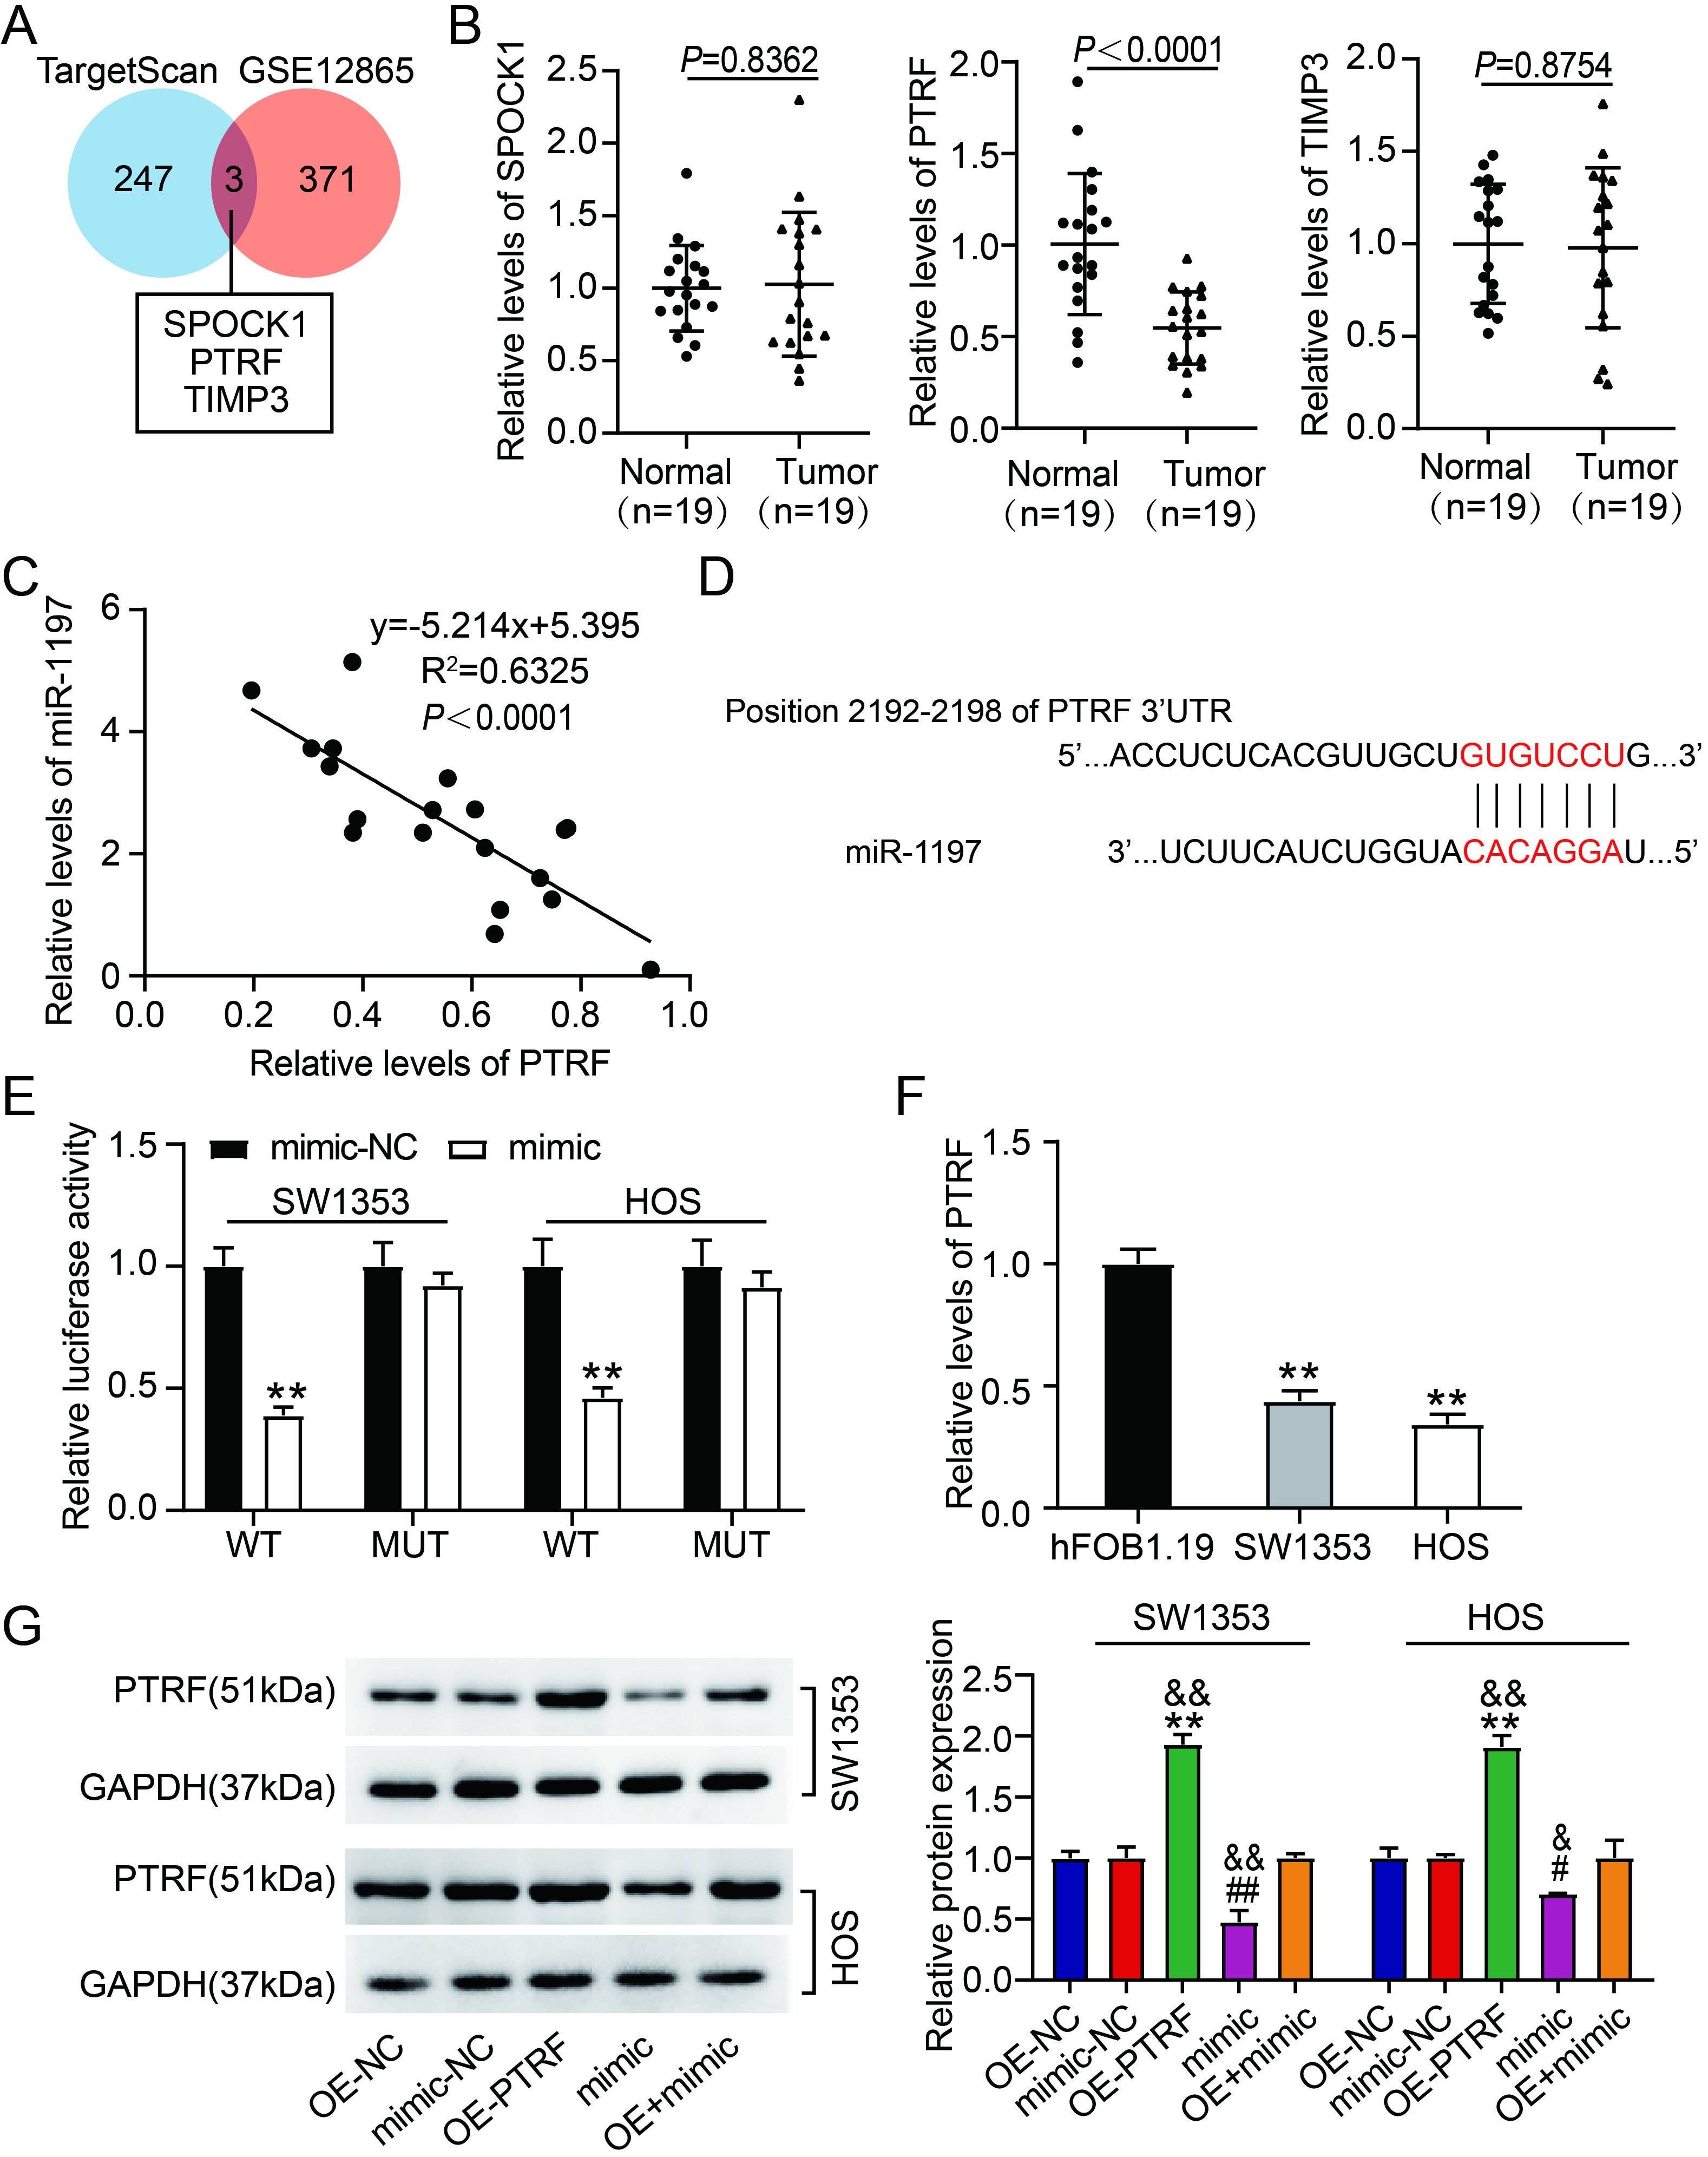 MiR-1197 targets PTRF. (A) Three genes were overlapped from TargetScan and GSE12865. (B) The levels of SPOCK1, PTRF, and TIMP3 in OS normal and tumoral tissues were estimated via quantitative RT-PCR. P< 0.0001 vs. normal. (C) The correlation between the miR-1197 and PTRF expressions in OS tissues was ascertained through Pearson correlation coefficient. (D) TargetScan predicted a miR-1197 – PTRF binding site. (E) The target relationship of miR-1197 with PTRF was verified through the dual luciferase experiment. ∗∗P < 0.01 vs PTRF WT + mimic-NC. (F) PTRF levels in hFOB1.19 cells and OS cell lines were gauged through qRT-PCR. ∗∗P < 0.01 vs. hFOB1.19 cells. (G) The levels of PTRF proteins in HOS and SW1353, after their OE-PTRF, OE-NC, mimic, mimic-NC, or OE-PTRF + mimic transfection, were analyzed via western blotting. # P < 0.05, # # P < 0.01 vs. mimic-NC. ∗∗P < 0.01 vs. OE-NC. & P < 0.05, & & P < 0.01 vs. OE-PTRF + mimic.